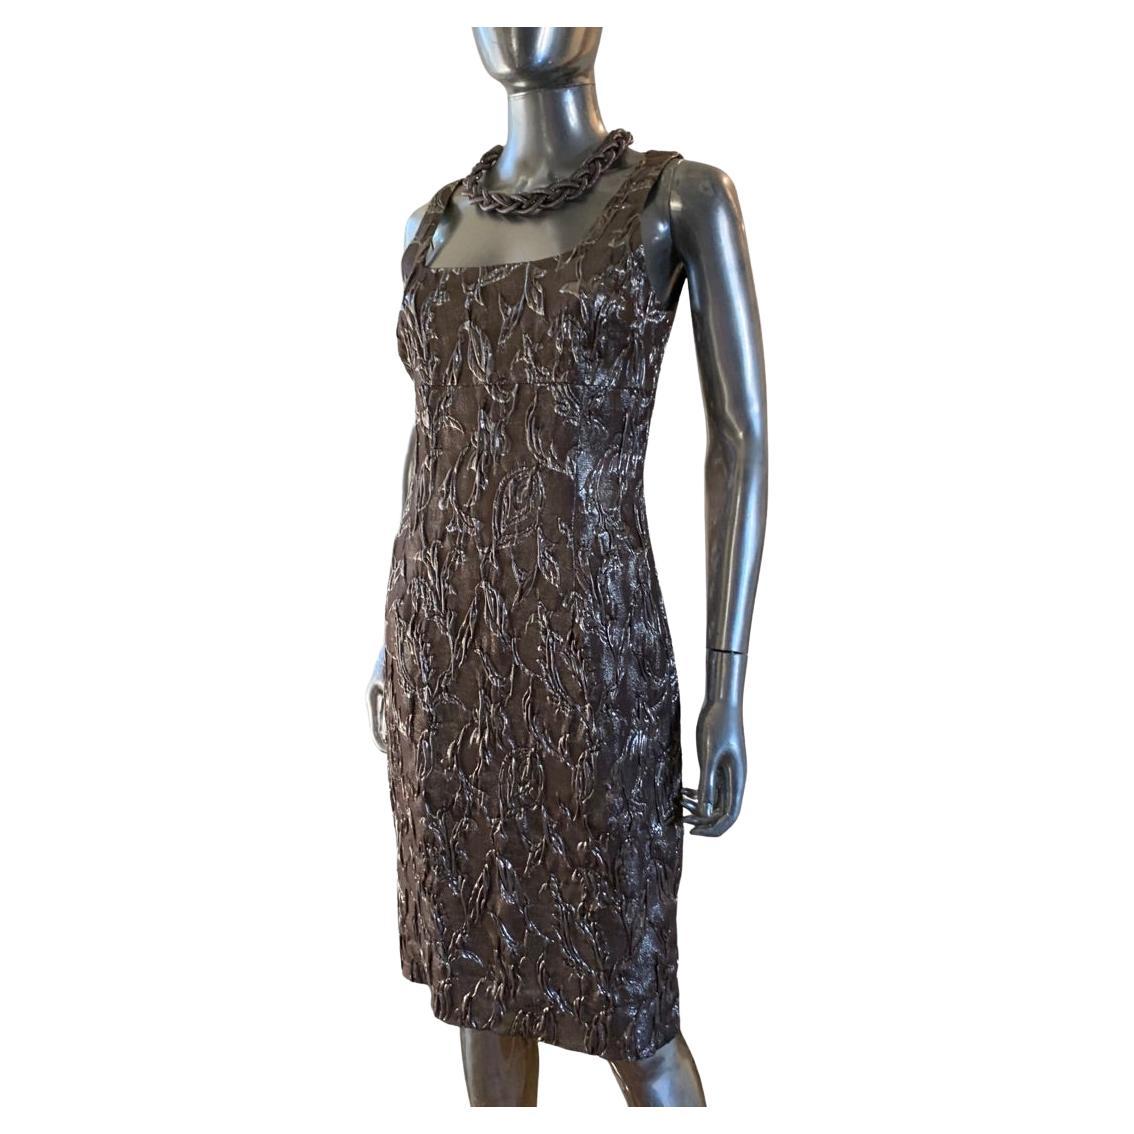 Michael Kors Collection Italy Floral Embossed Metallic Sleeveless Dress Size 6 For Sale